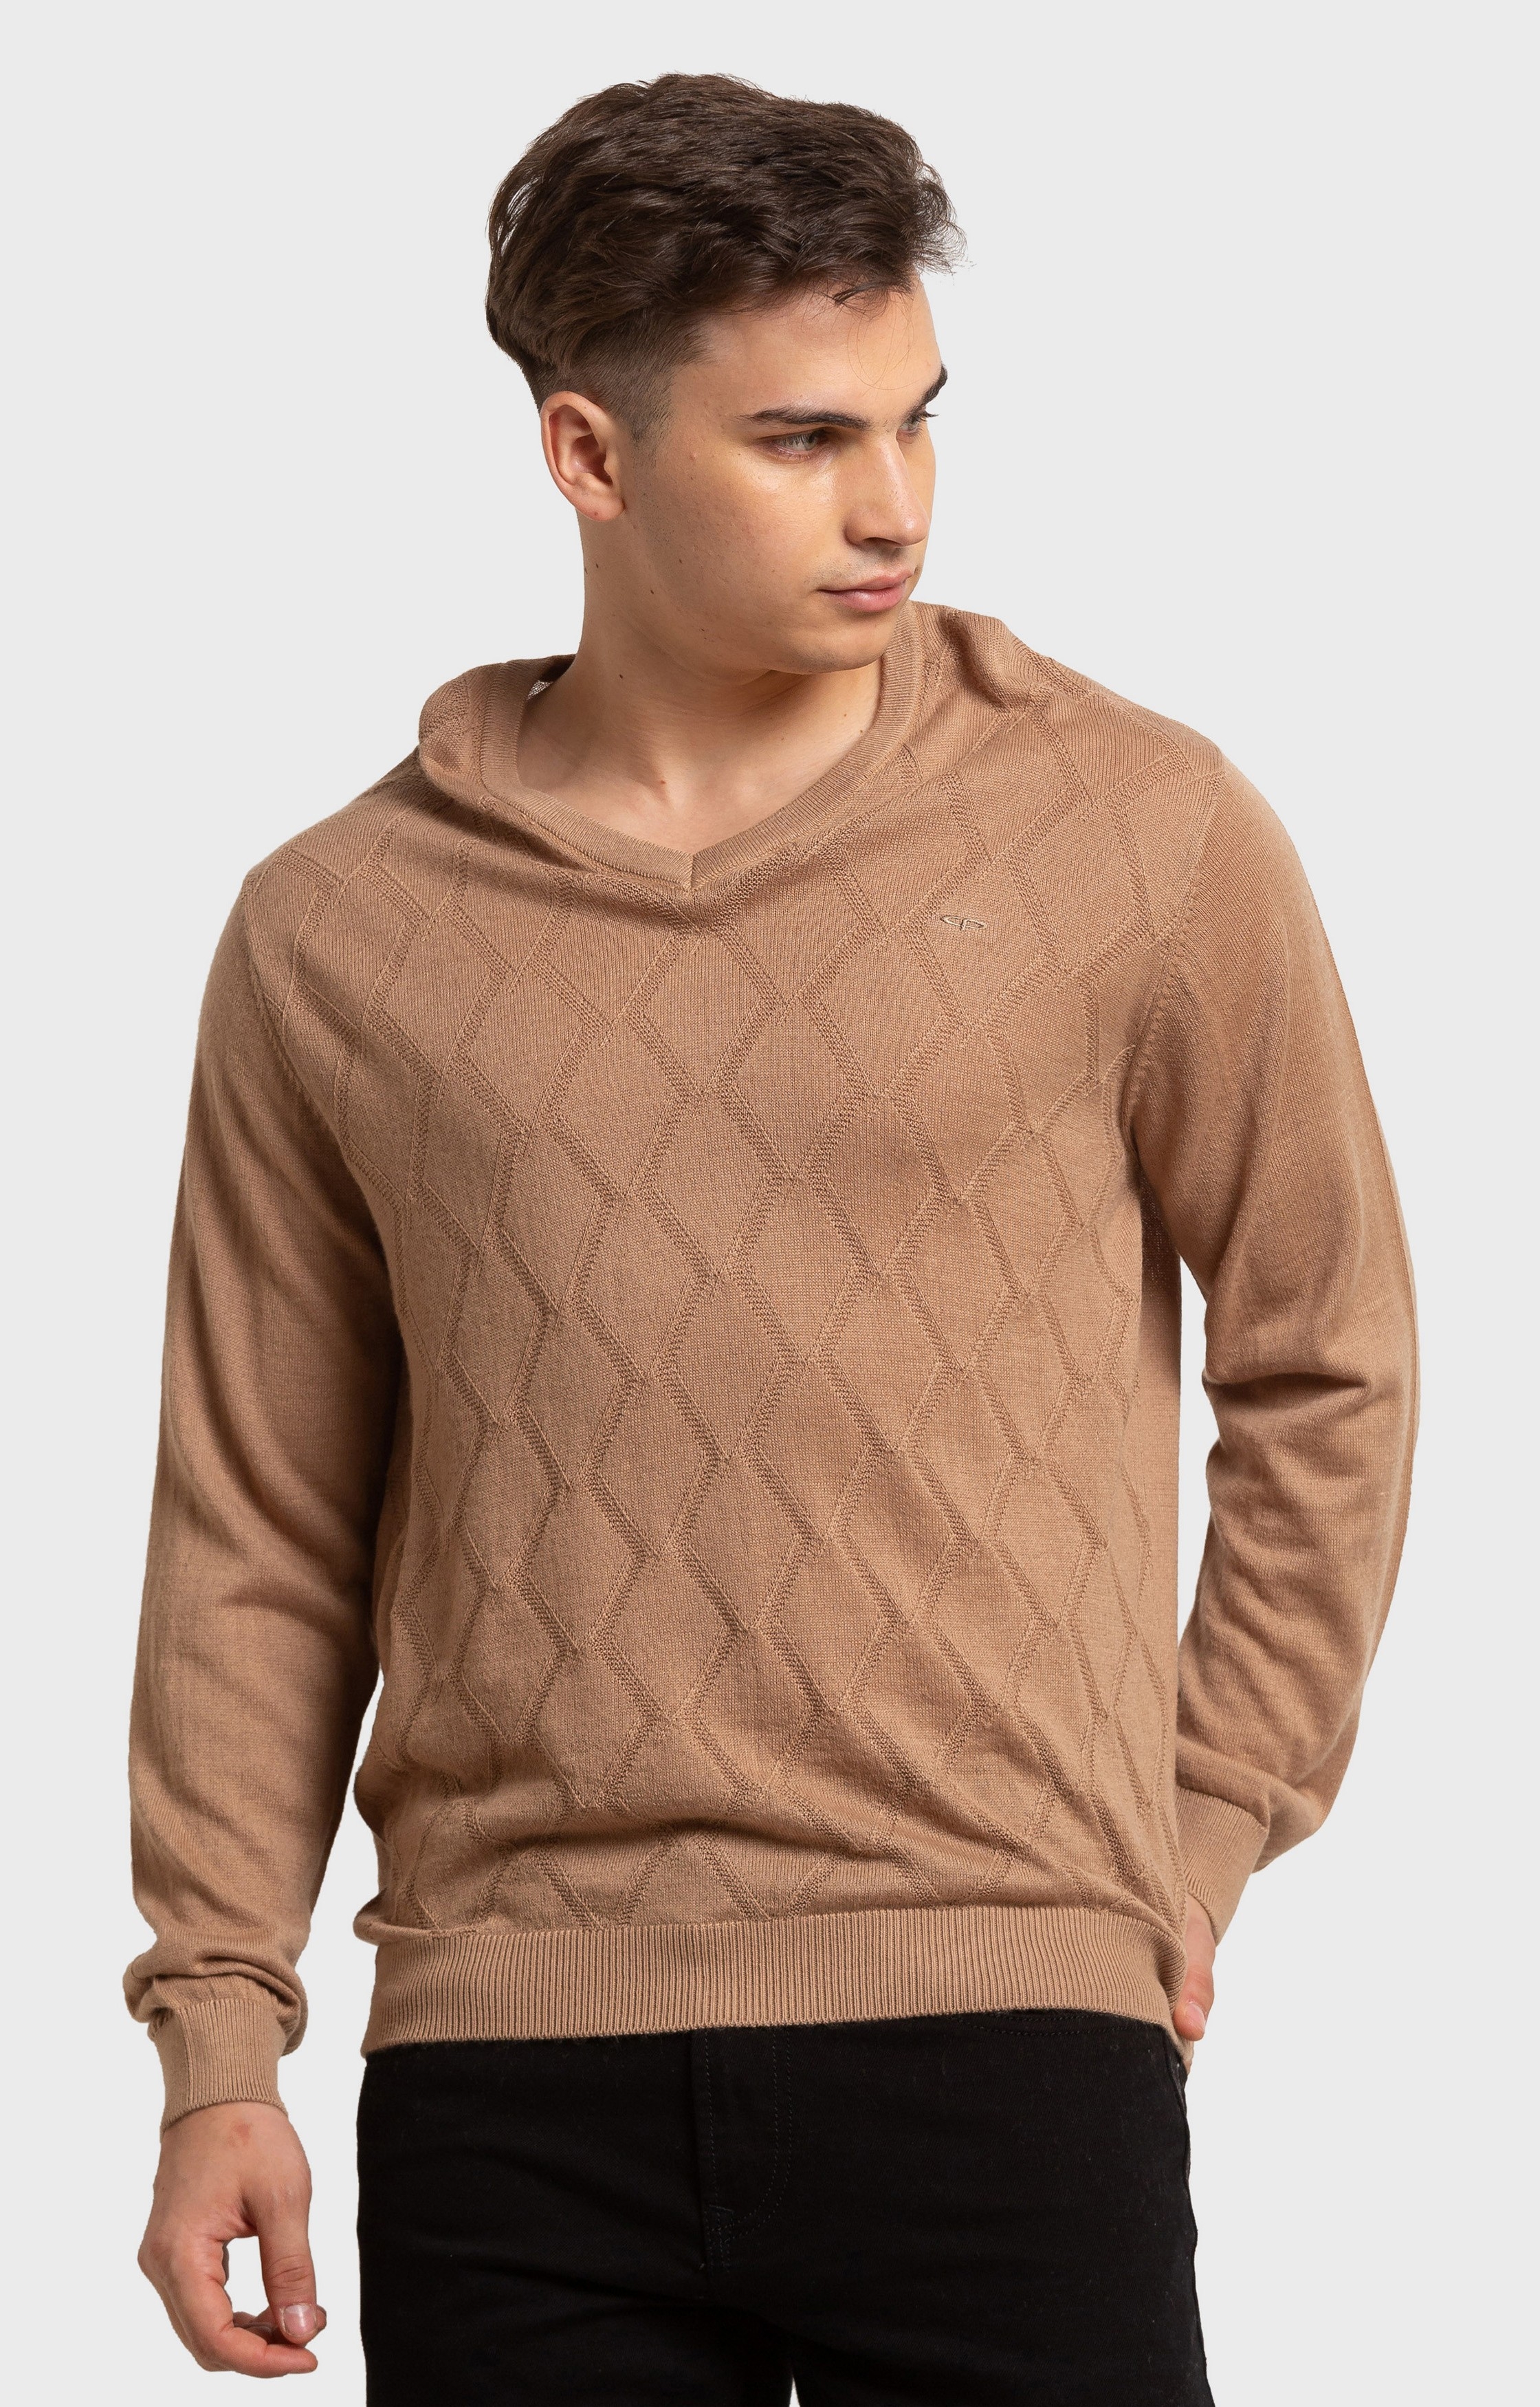 ColorPlus | ColorPlus Tailored Fit Brown Sweater For Men